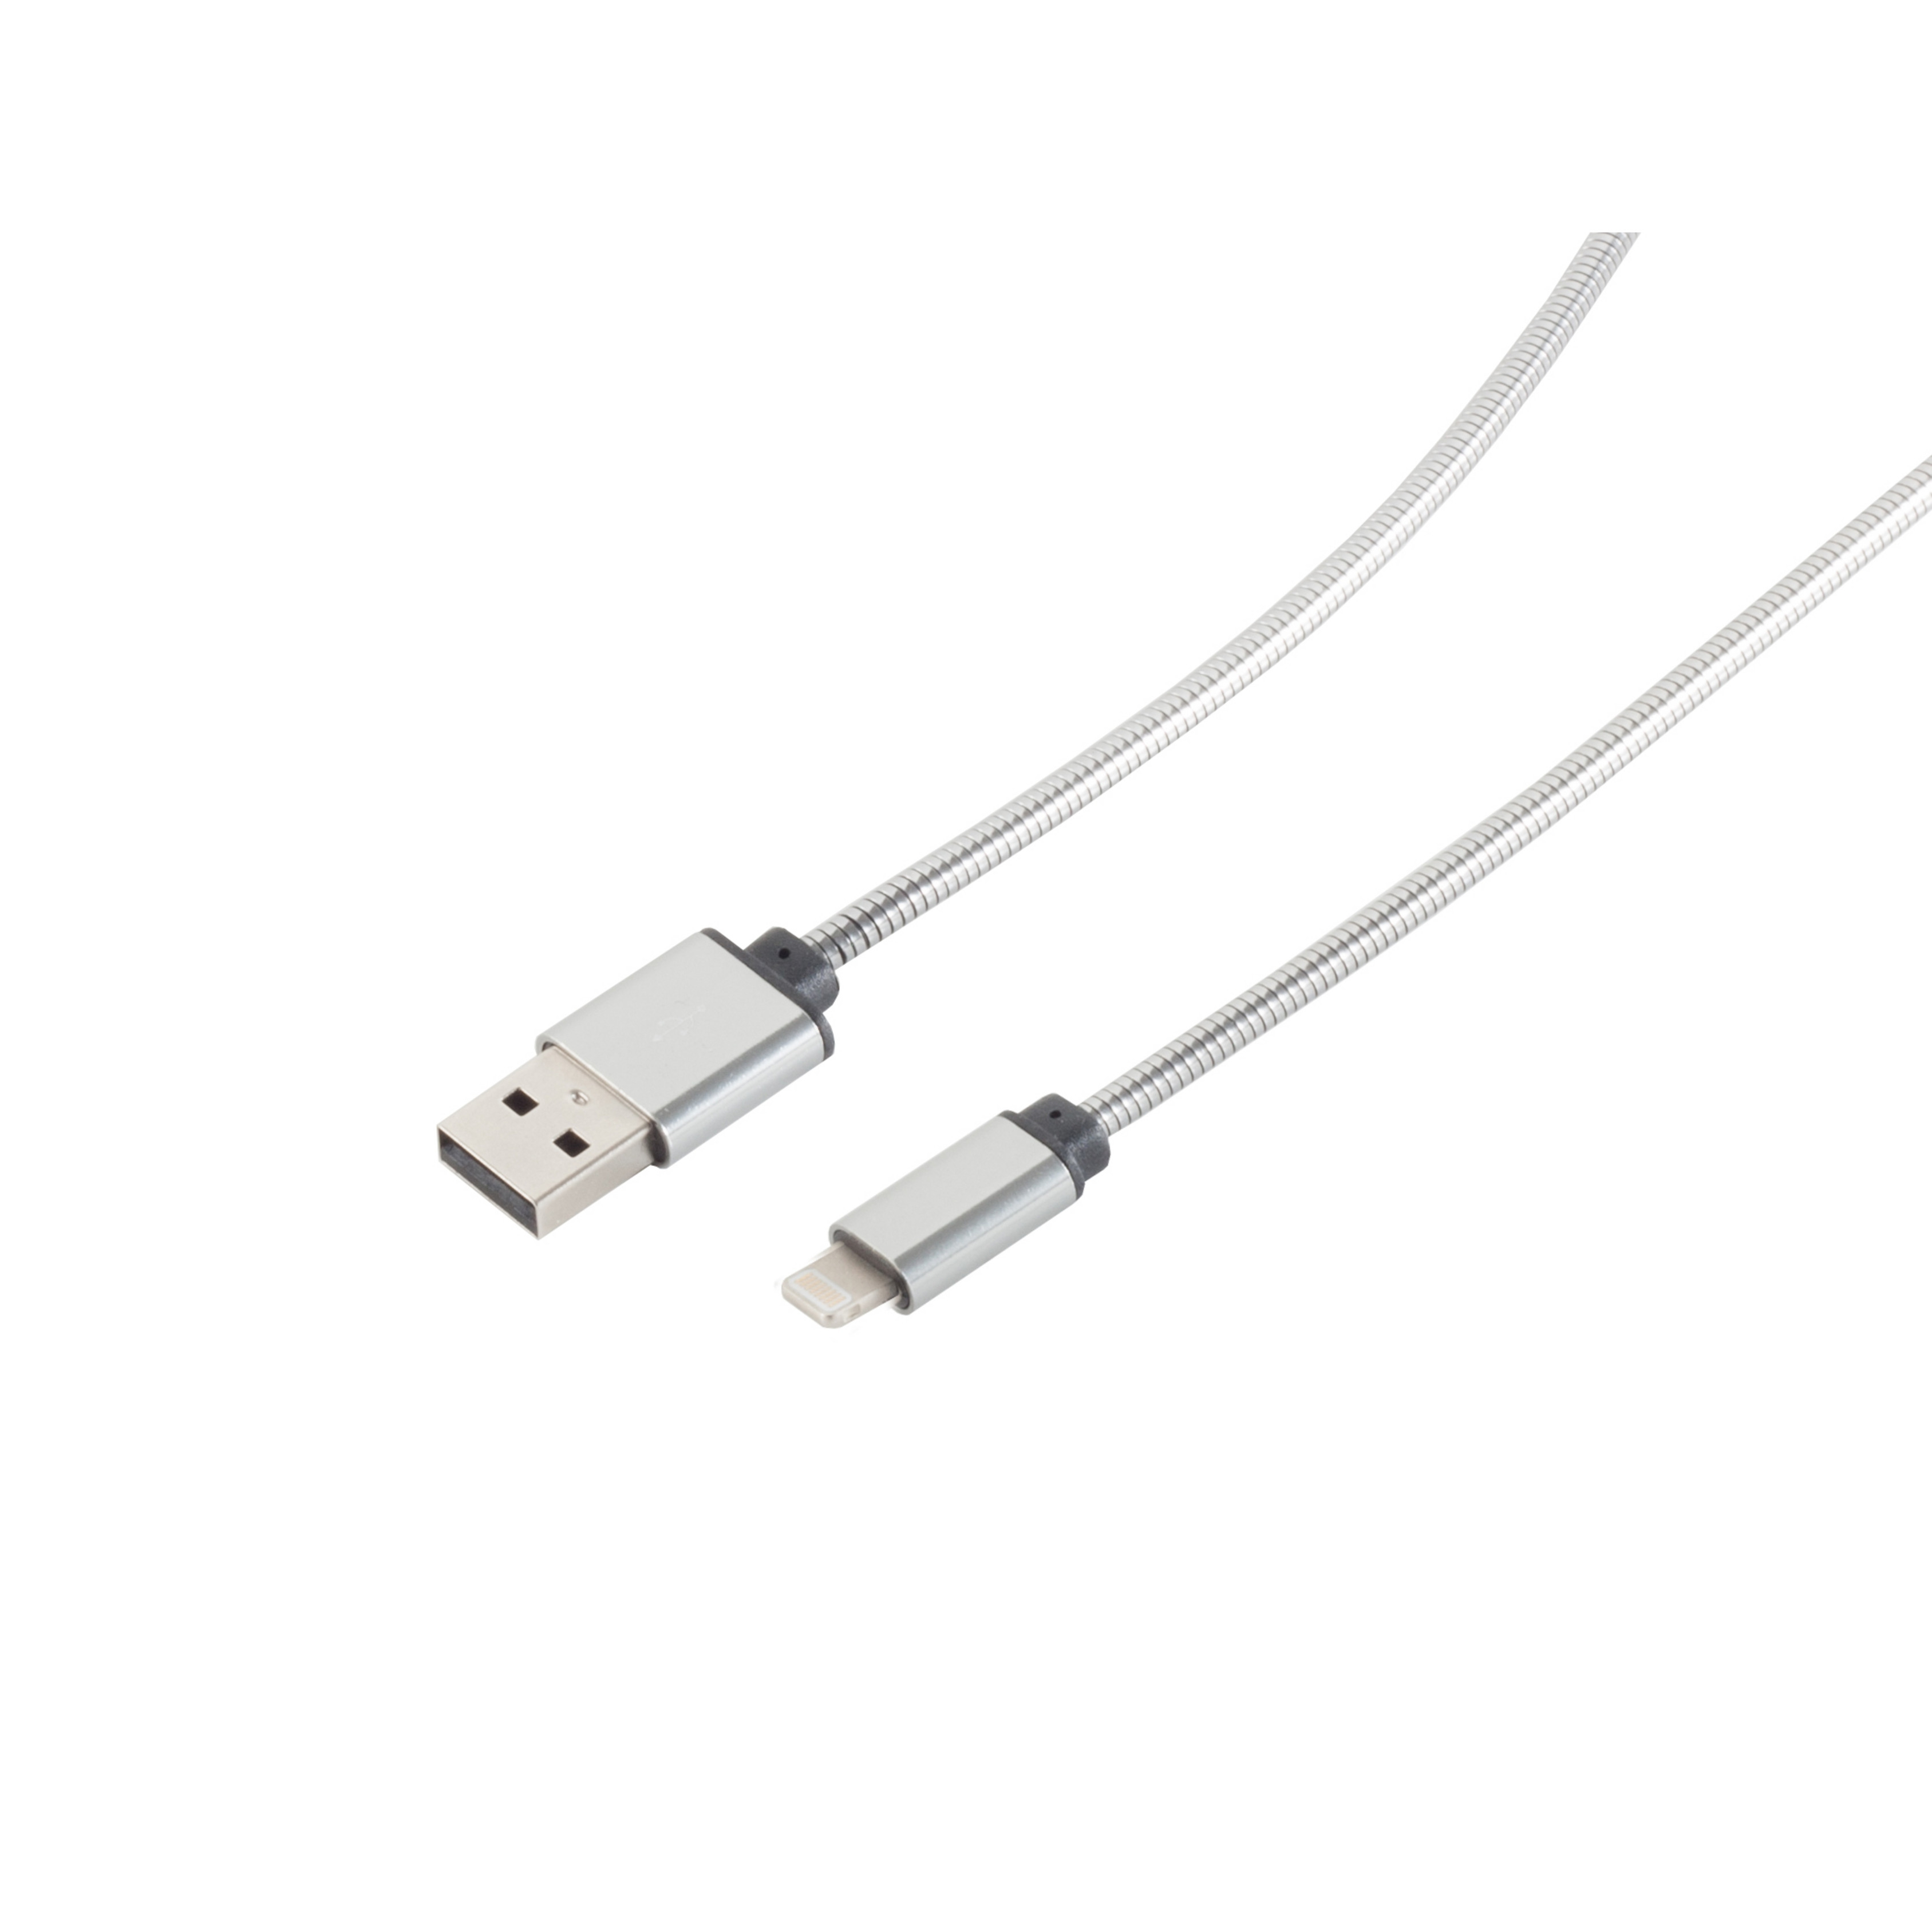 Silber Kabel 8-pin MAXIMUM Kabel Lade-Sync 1m Steel S/CONN CONNECTIVITY A/ USB USB USB